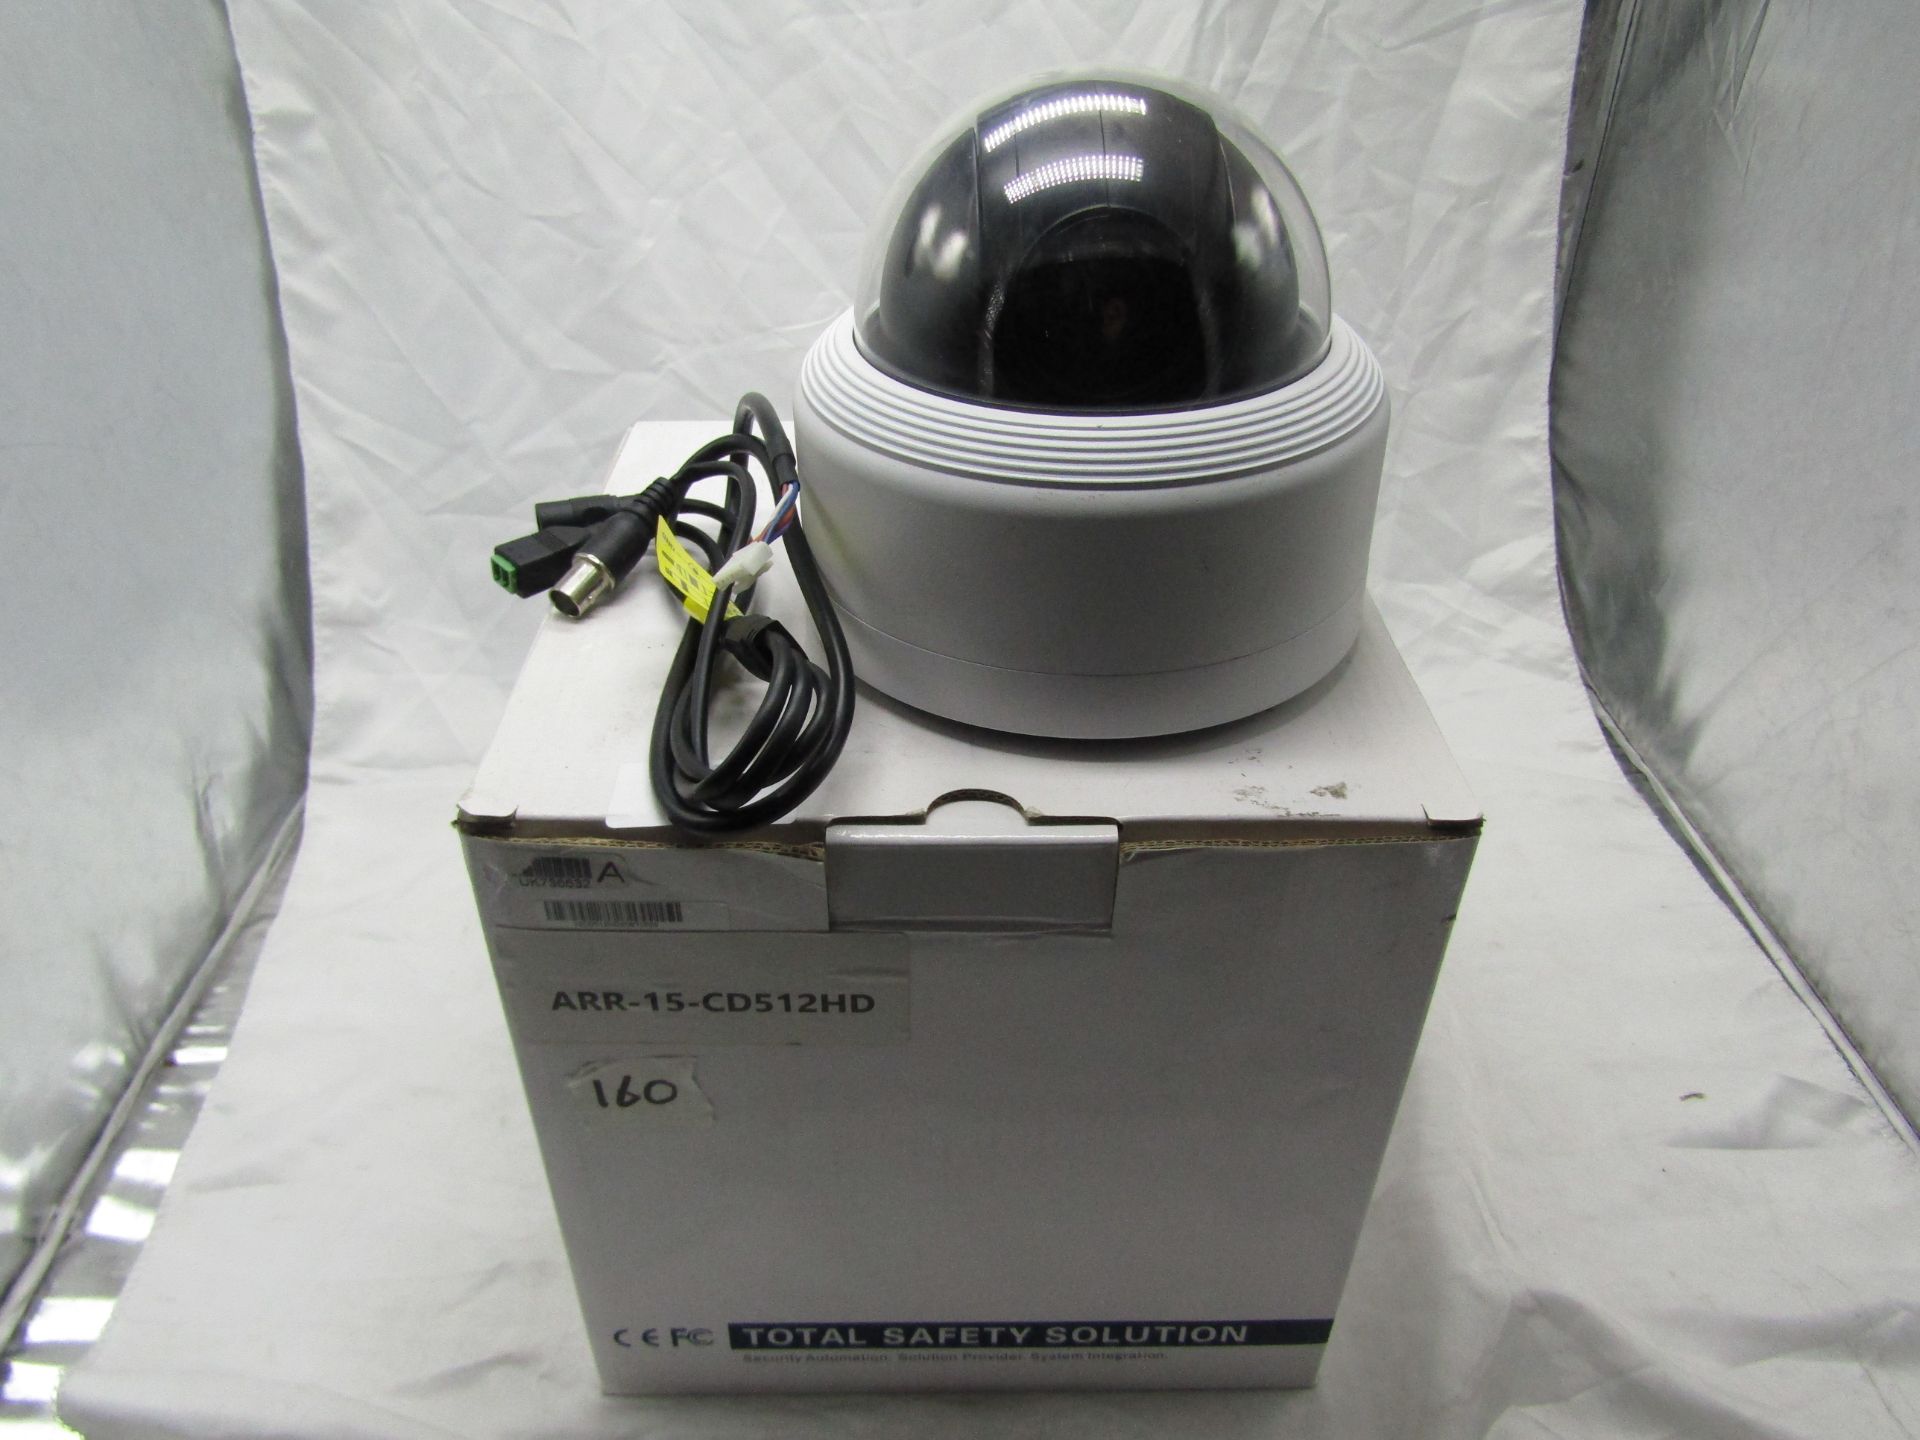 one lot of over 200 items of CCTV and Surveillance equipment, includes DVRs, Cameras, Thermal - Image 76 of 104